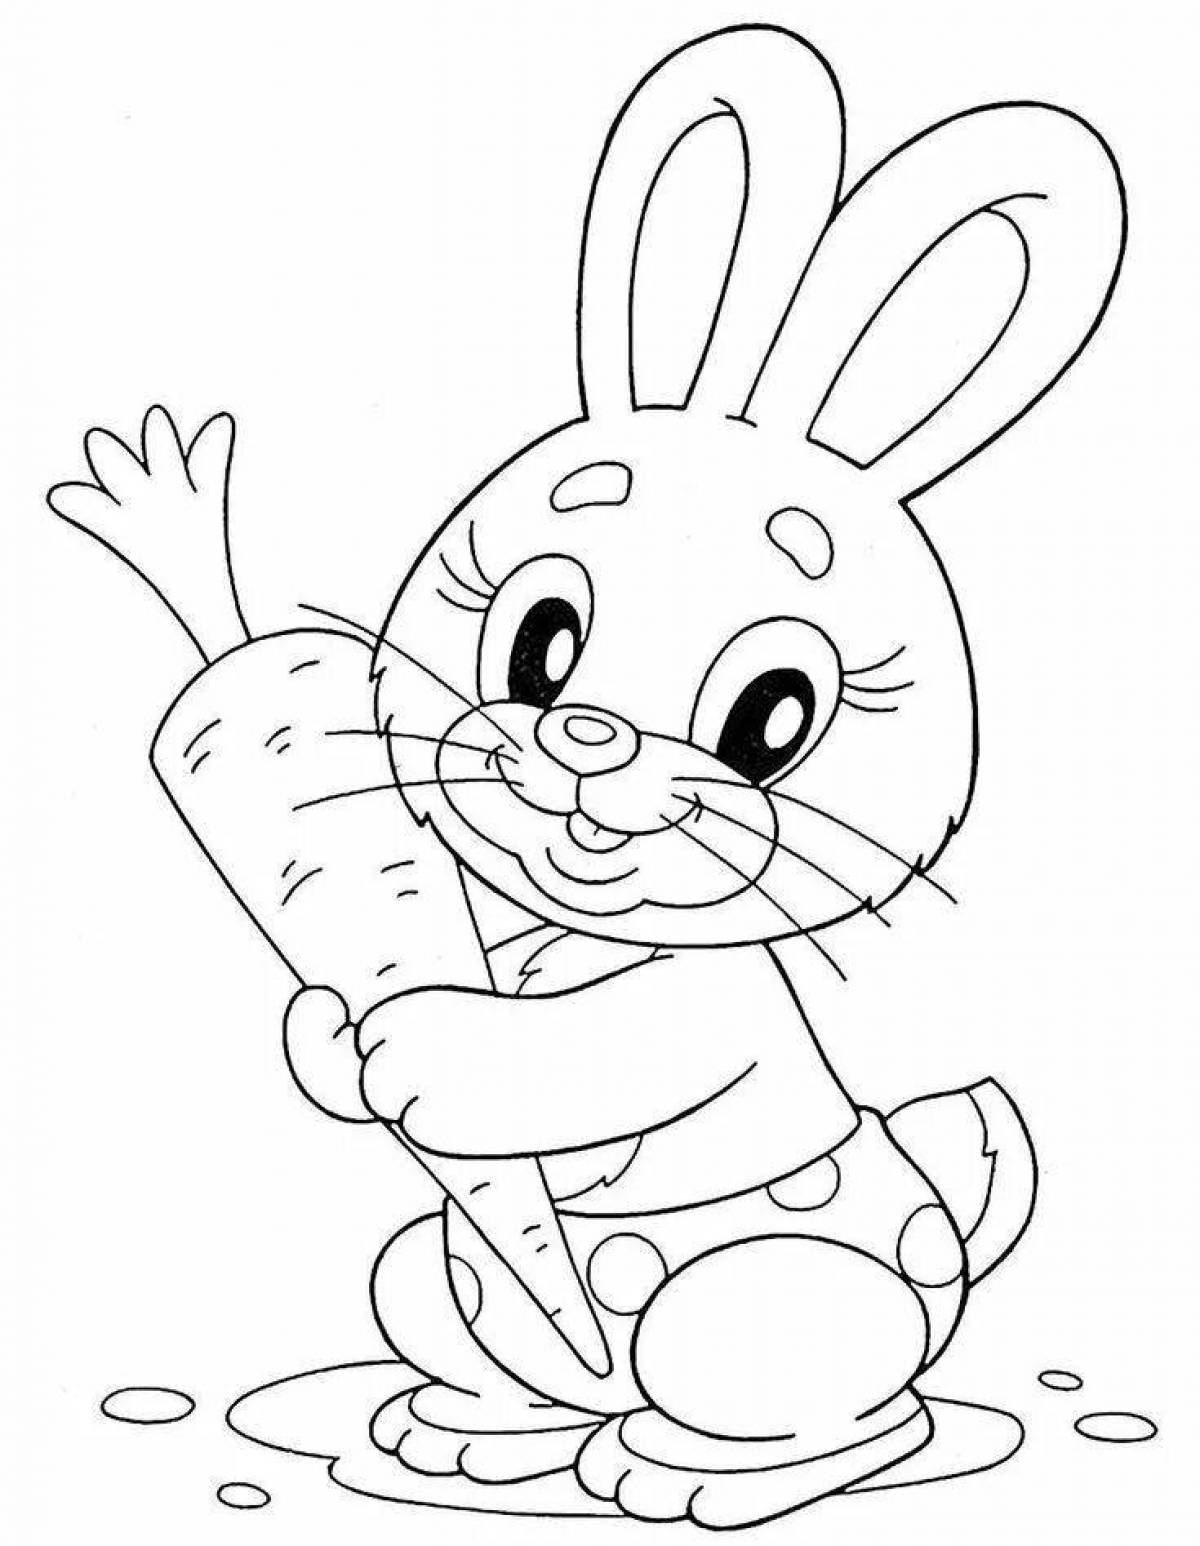 Gorgeous coloring page rabbit drawing